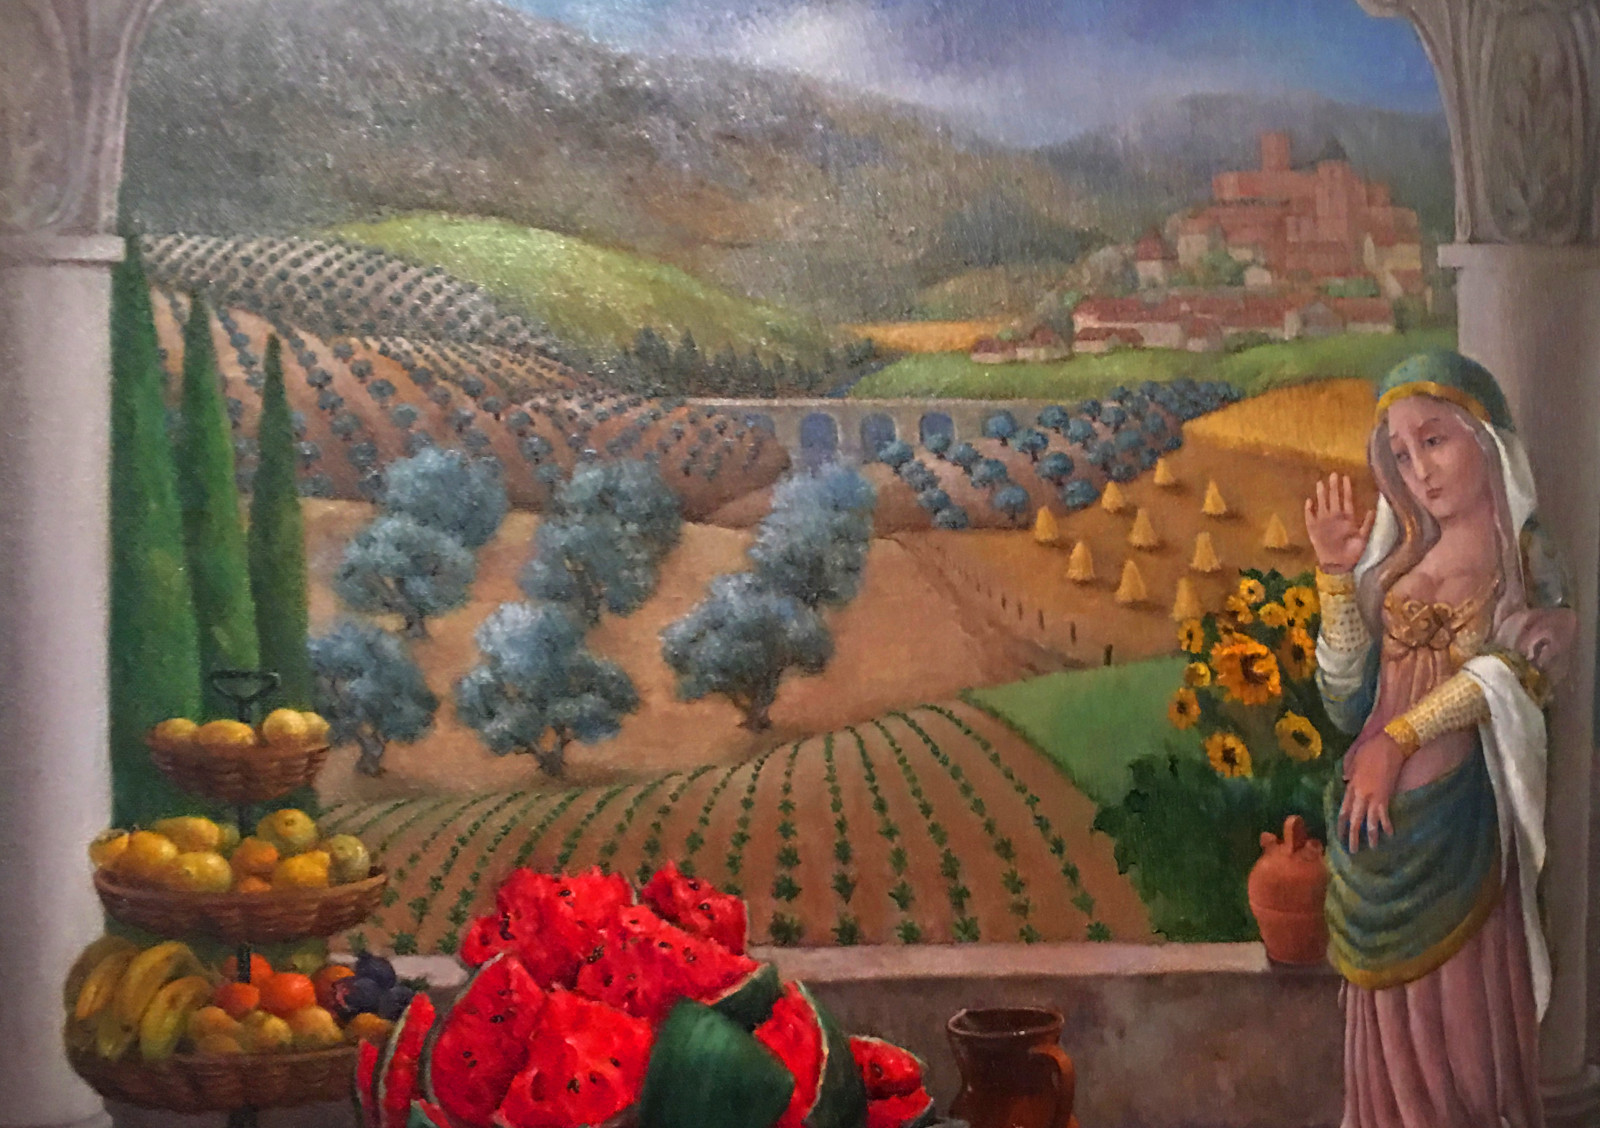 Painting by Louise Craven Hourrigan: Madonna figurine, bowl of sliced watermelon, and rolling hills with orchards.